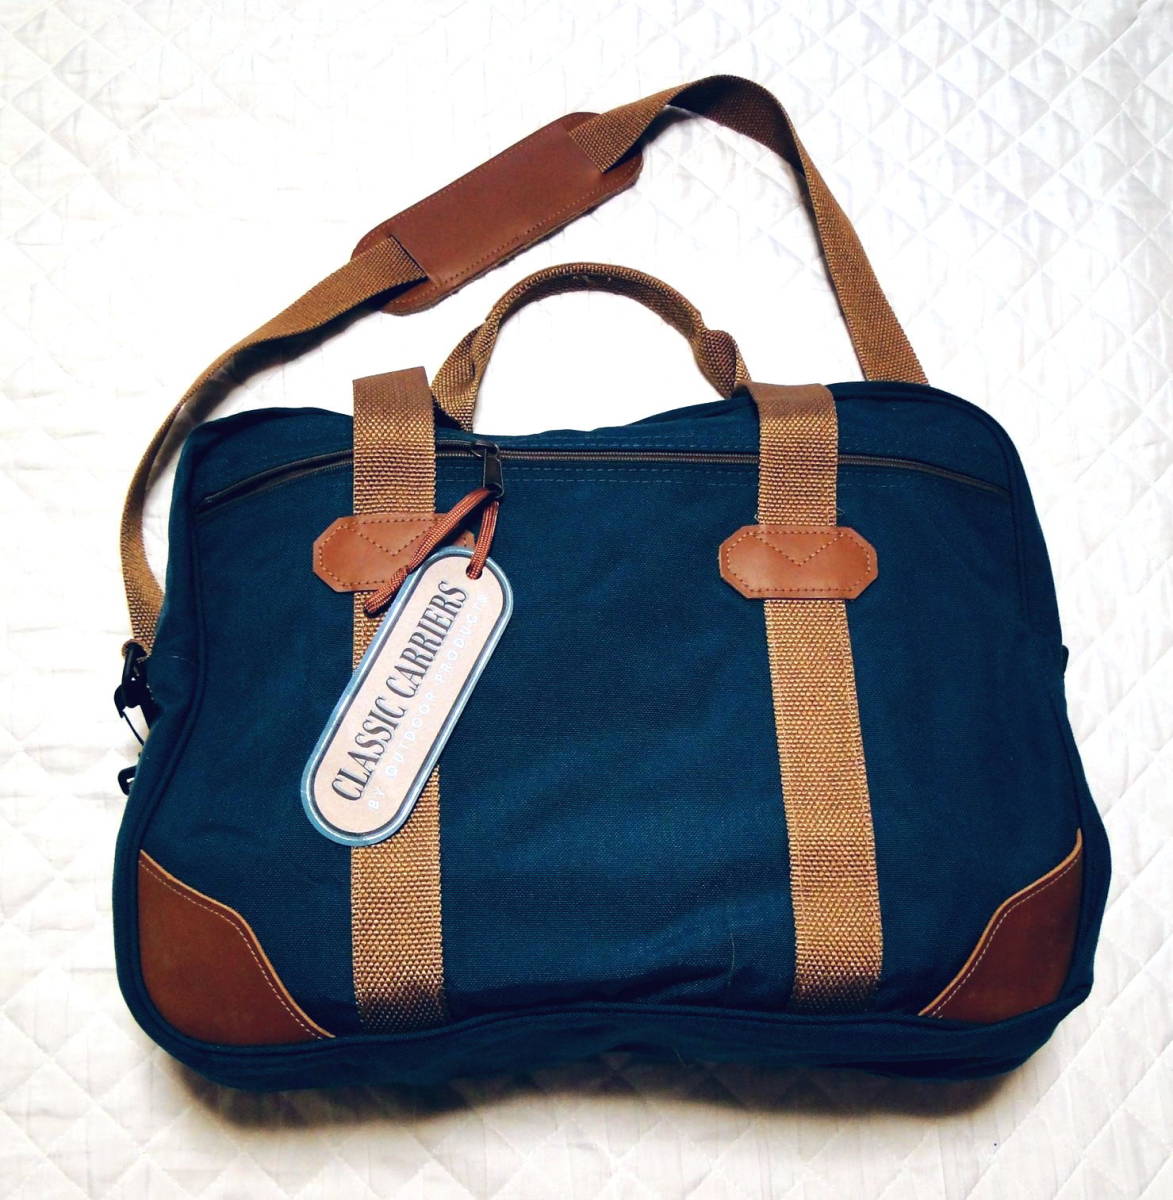 90’s アウトドアプロダクツ OUTDOOR PRODUCTS 182 SHOULDER BRIEFCASE デッドストック アメリカ製 送料込_画像1